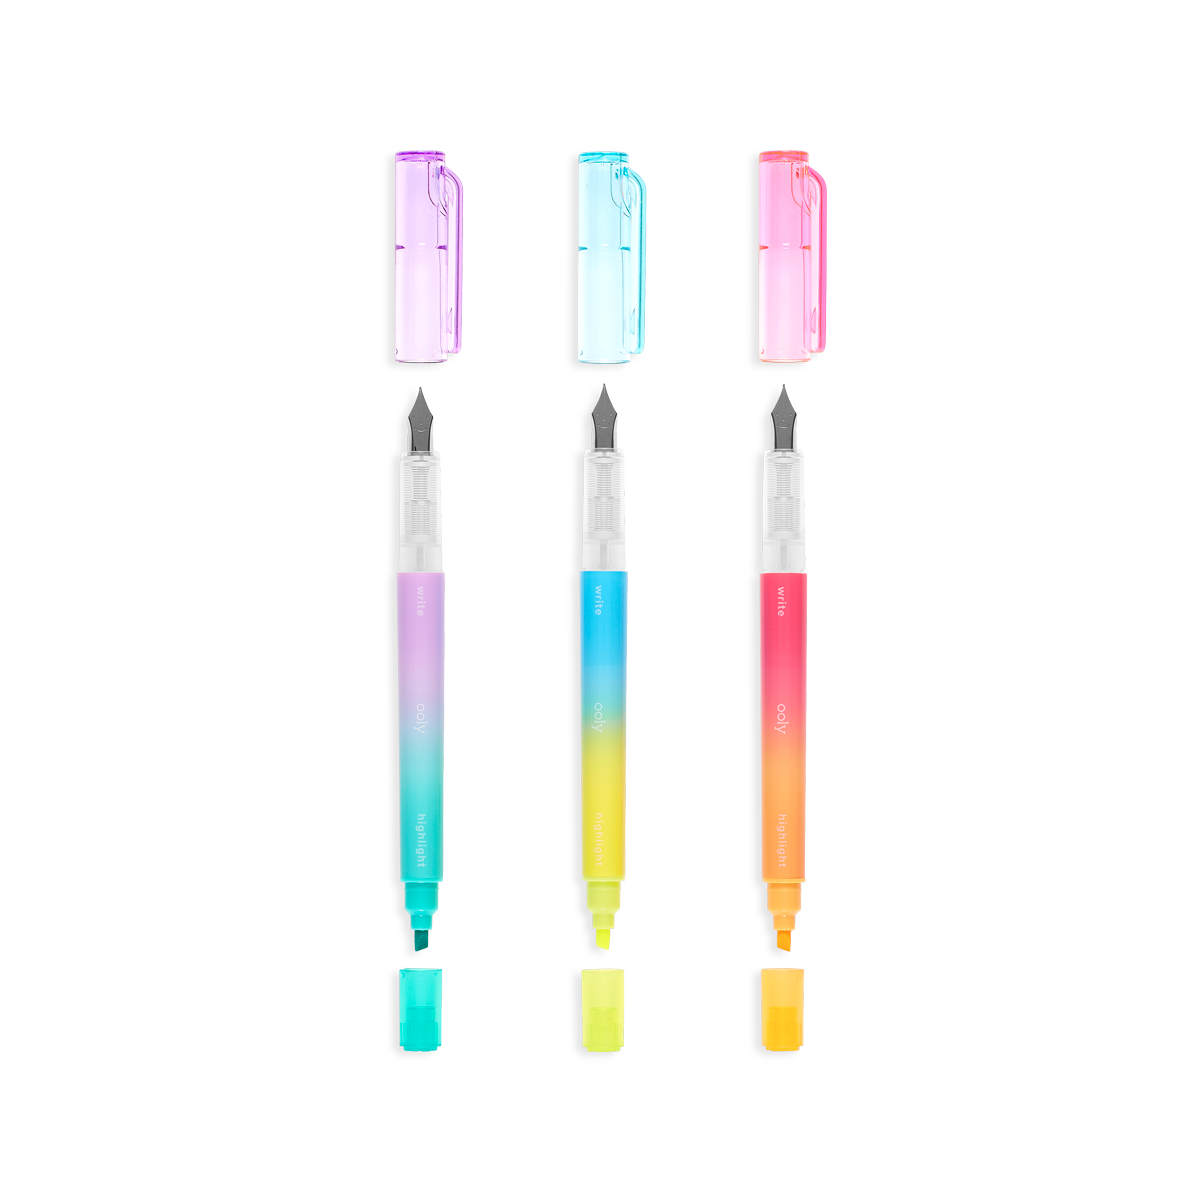 Writer's Duo 2 in 1 Fountain Pens + Highlighters without packaging